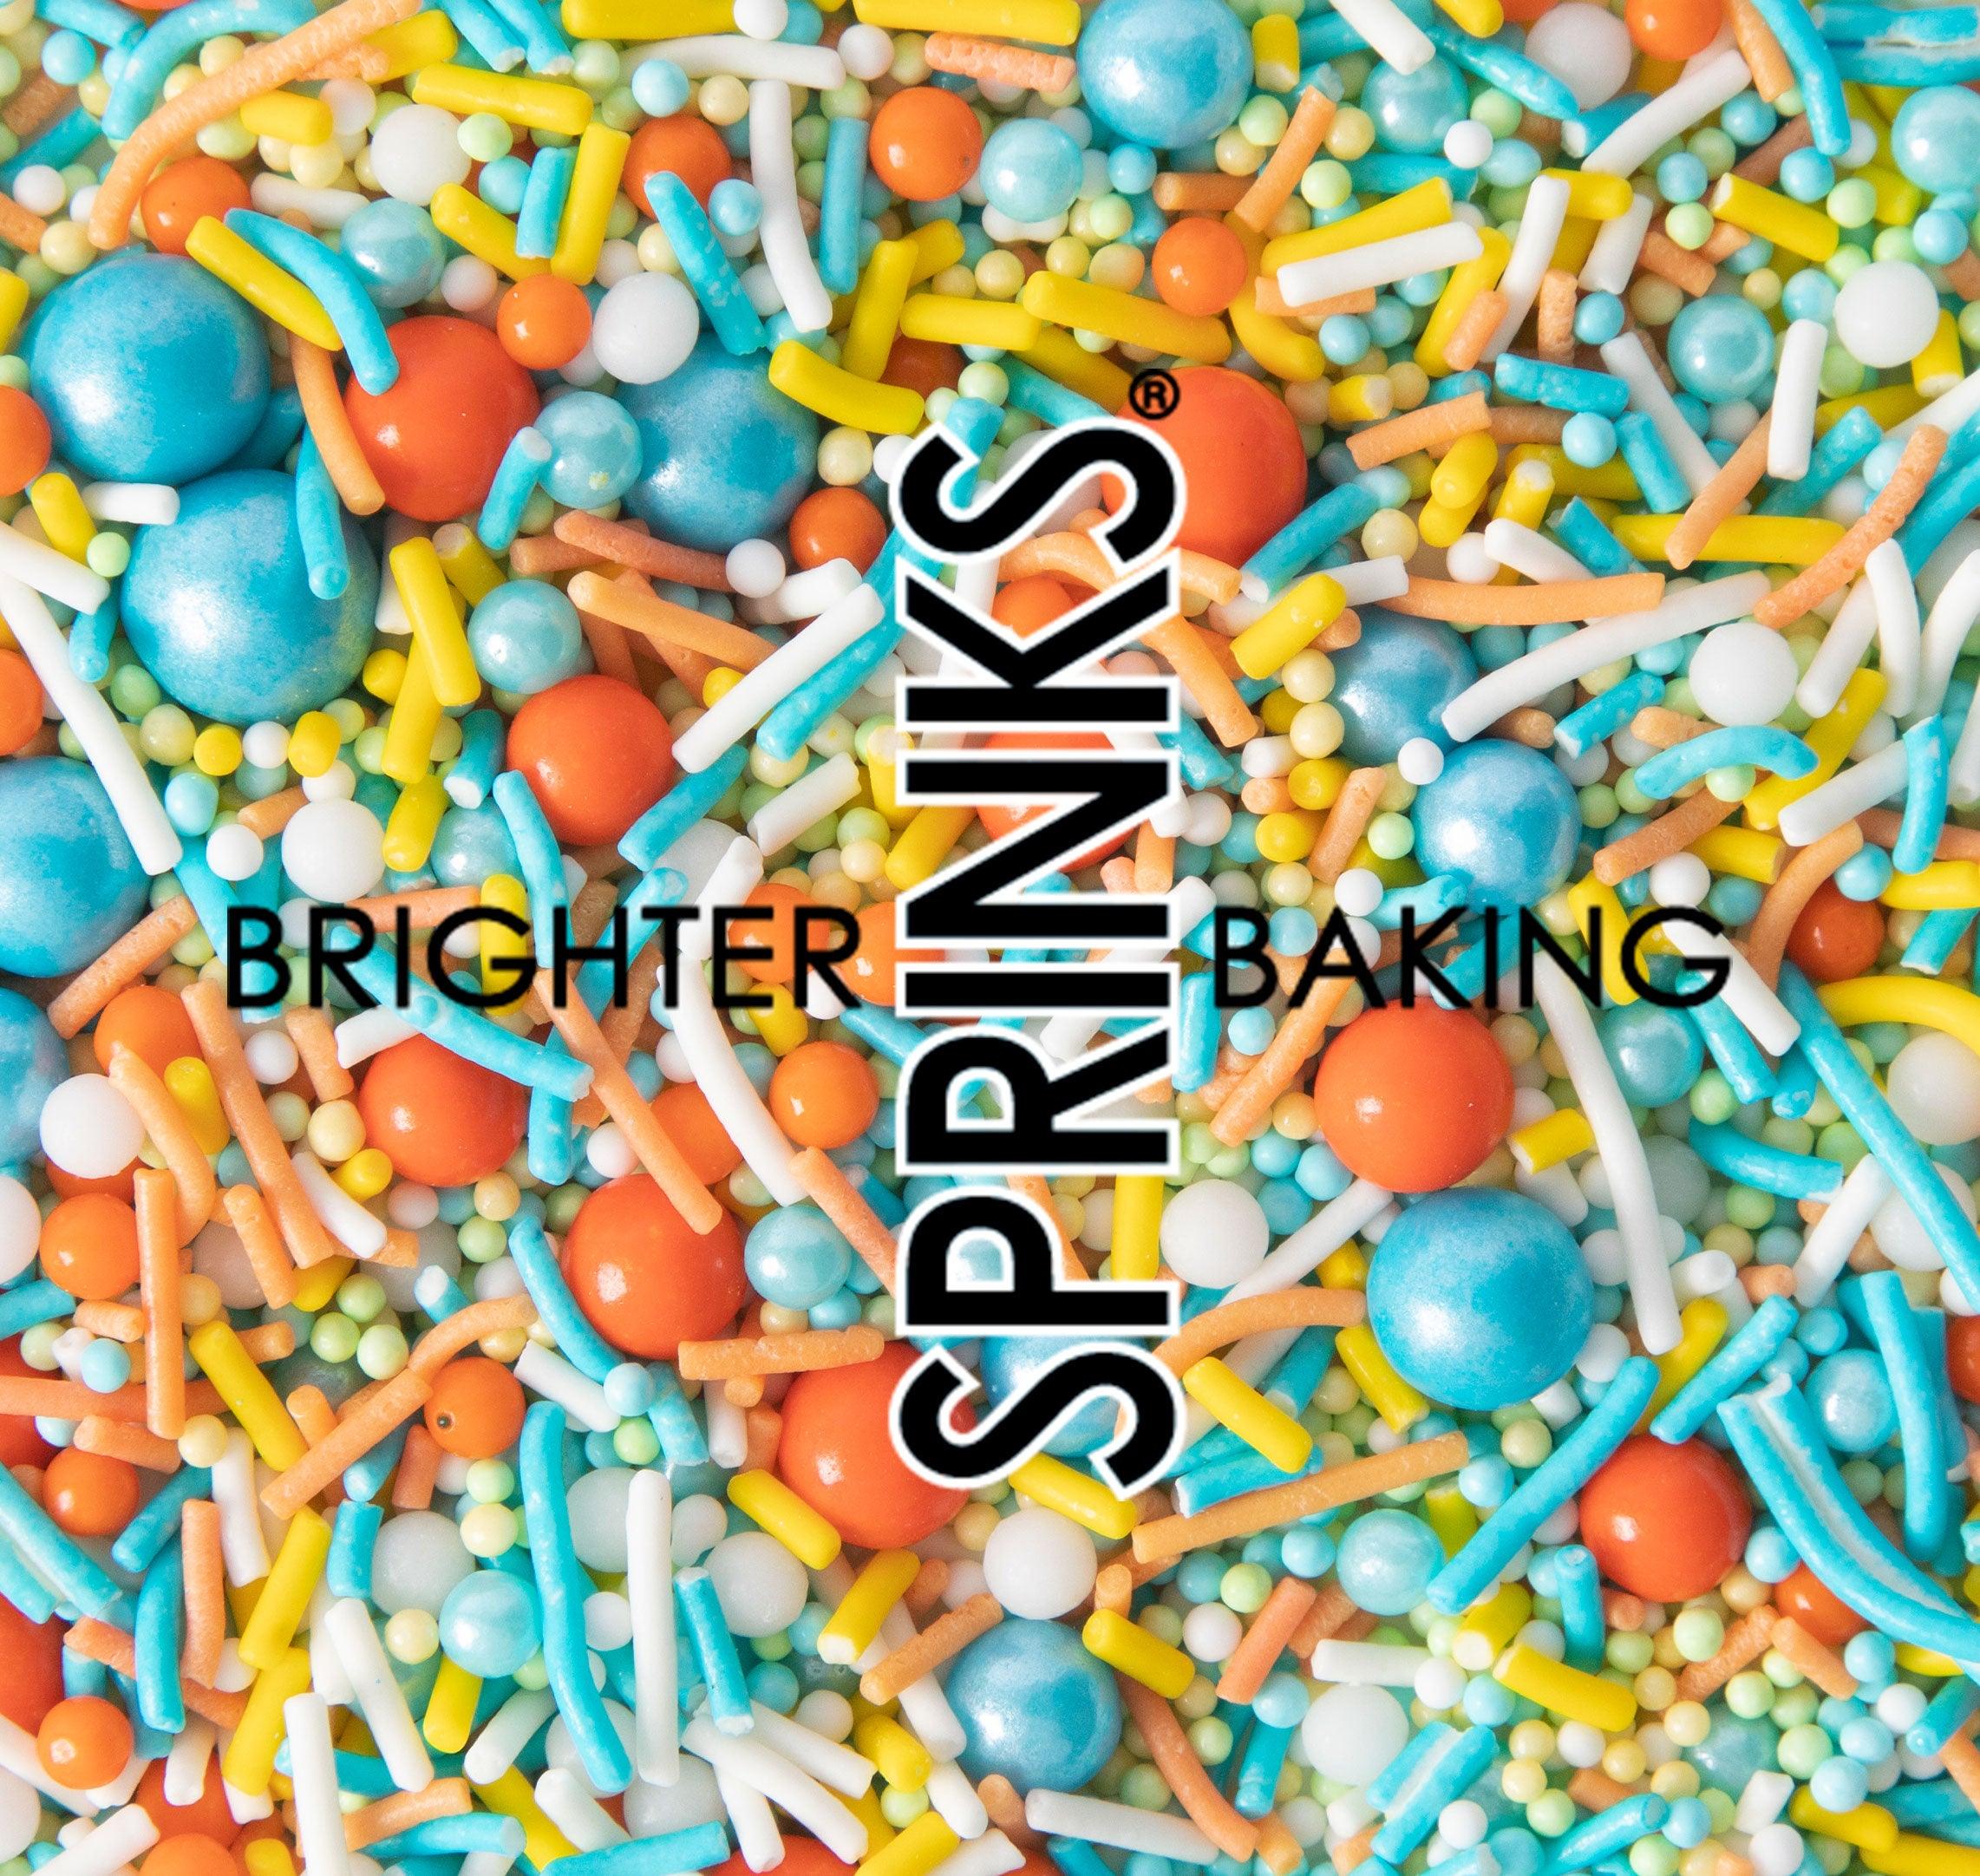 Wild One Sprinkles - The Party Room